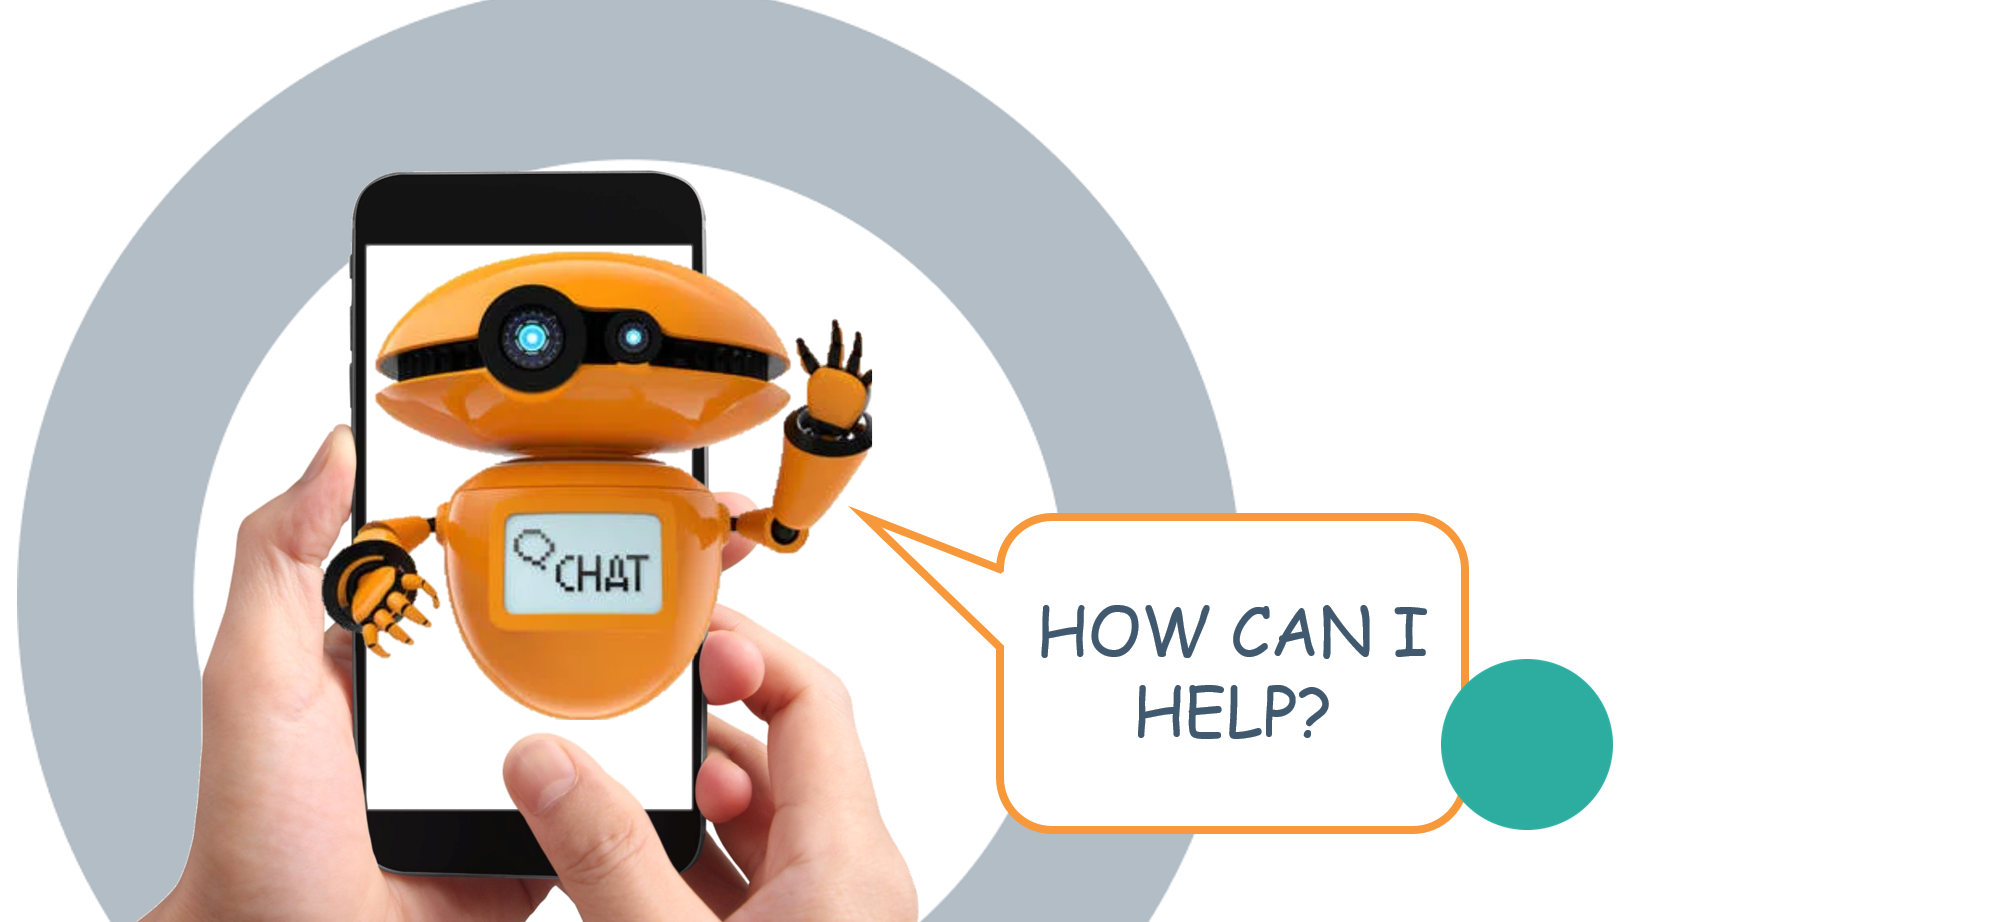 4 Smart Ways to Automate Data Collection with Chatbots